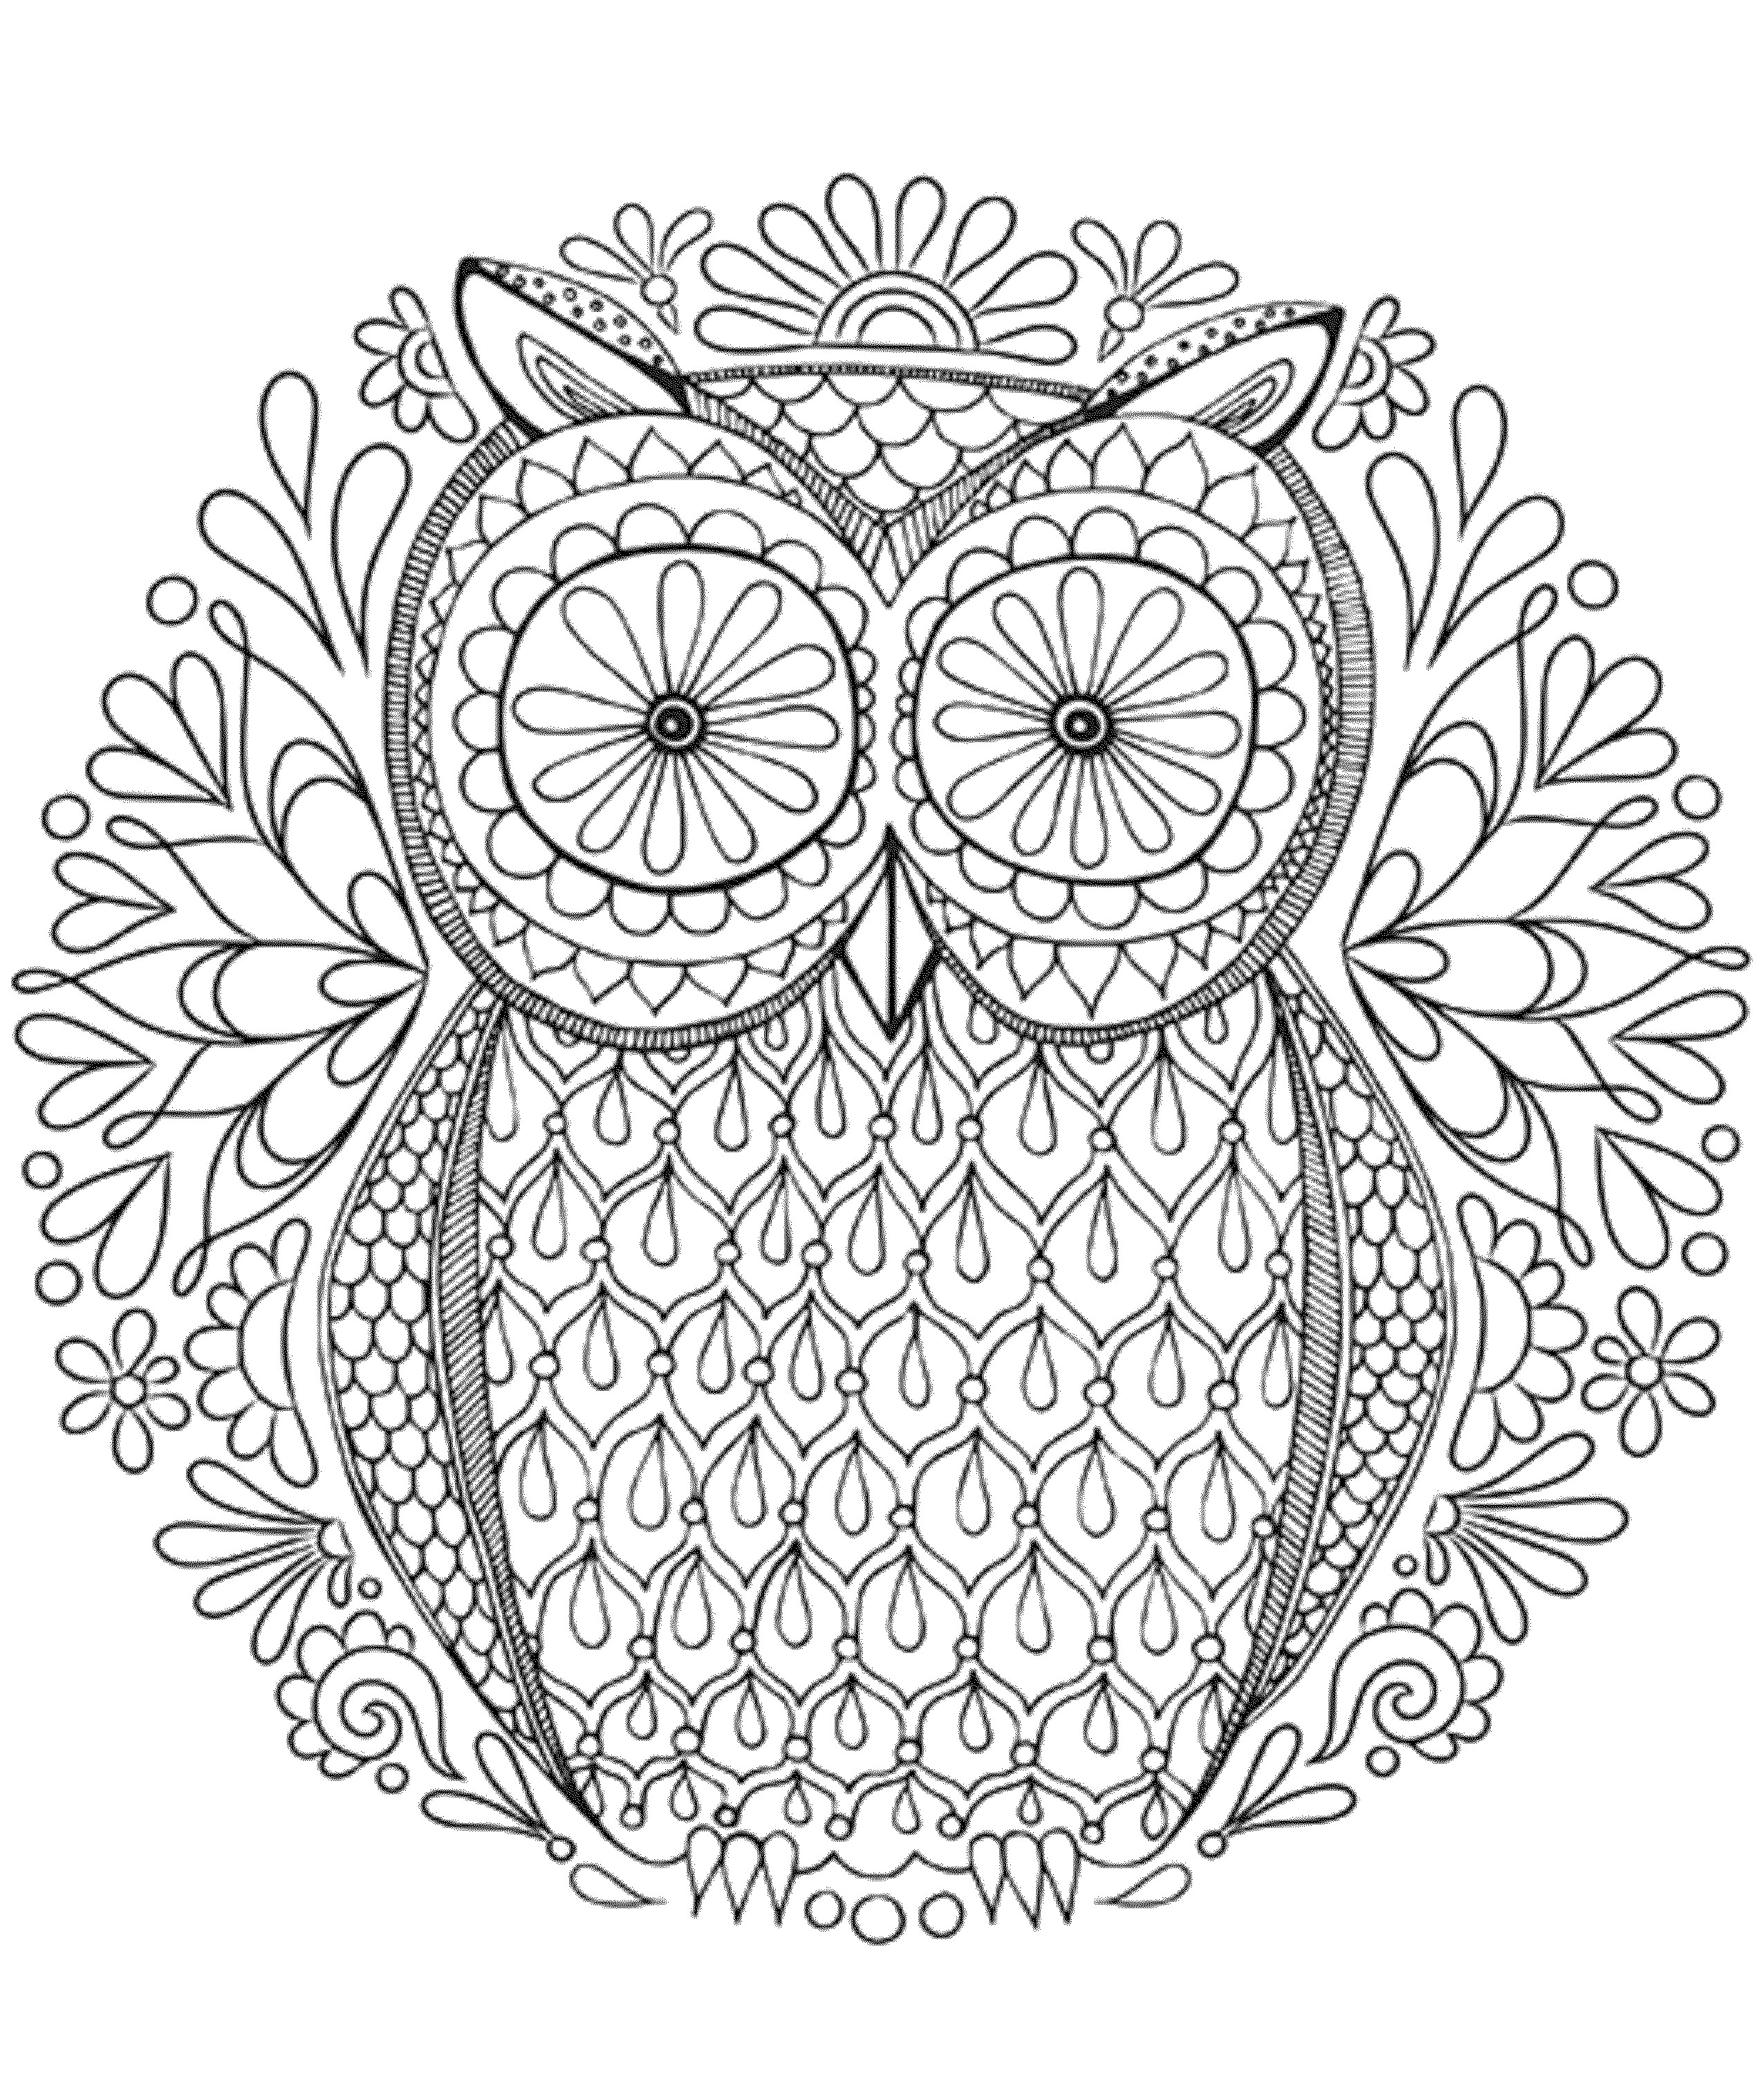 Free Coloring Pages For Adults
 Hard Coloring Pages for Adults Best Coloring Pages For Kids